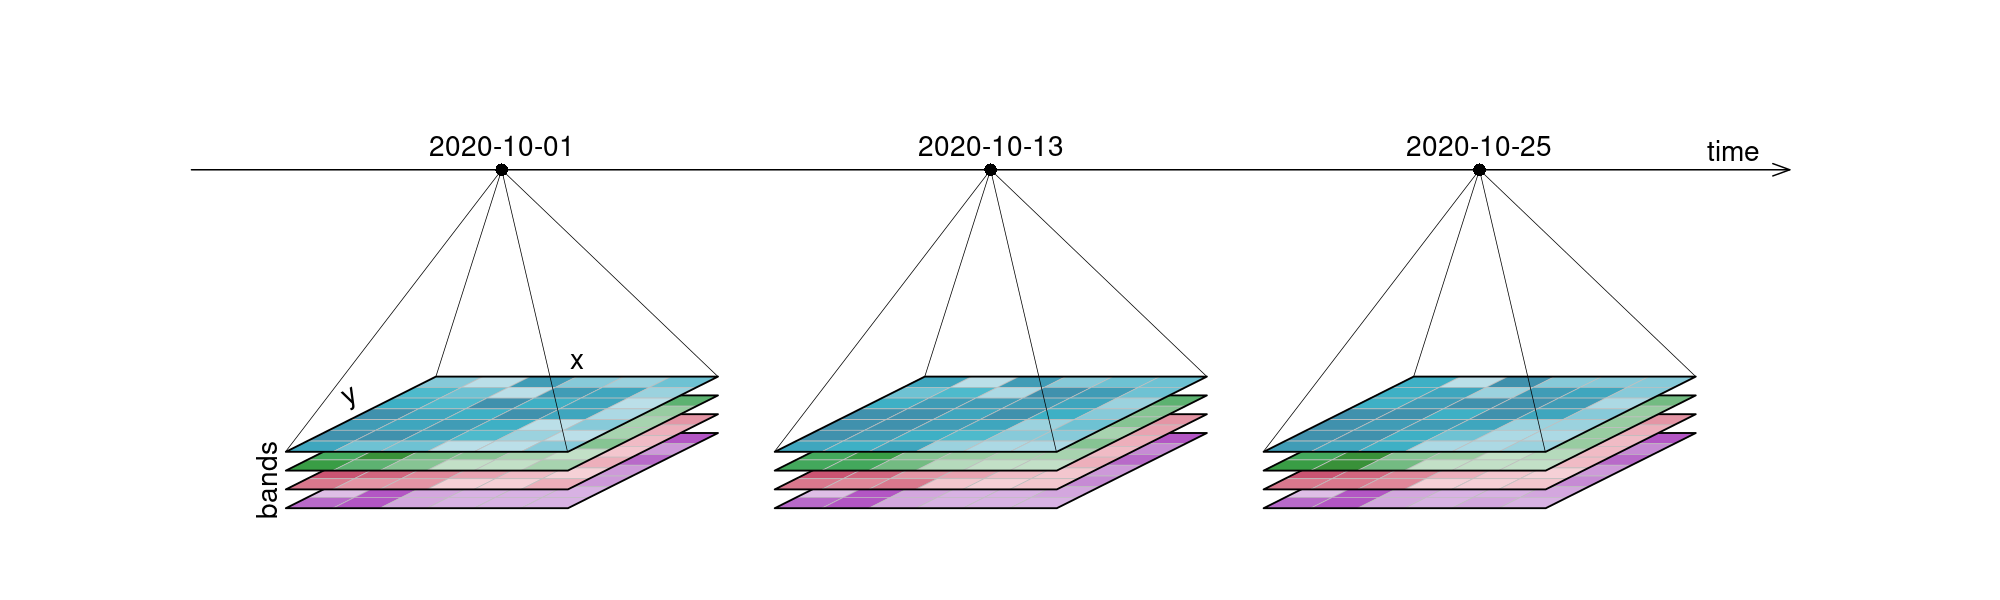 Datacube timeseries: 12 imagery tiles are depicted, grouped by 3 dates along a timeline (time dimension). Each date has a blue, green, red and near-infrared band (bands dimension). Each single tile has the dimensions x and y (spatial dimensions).